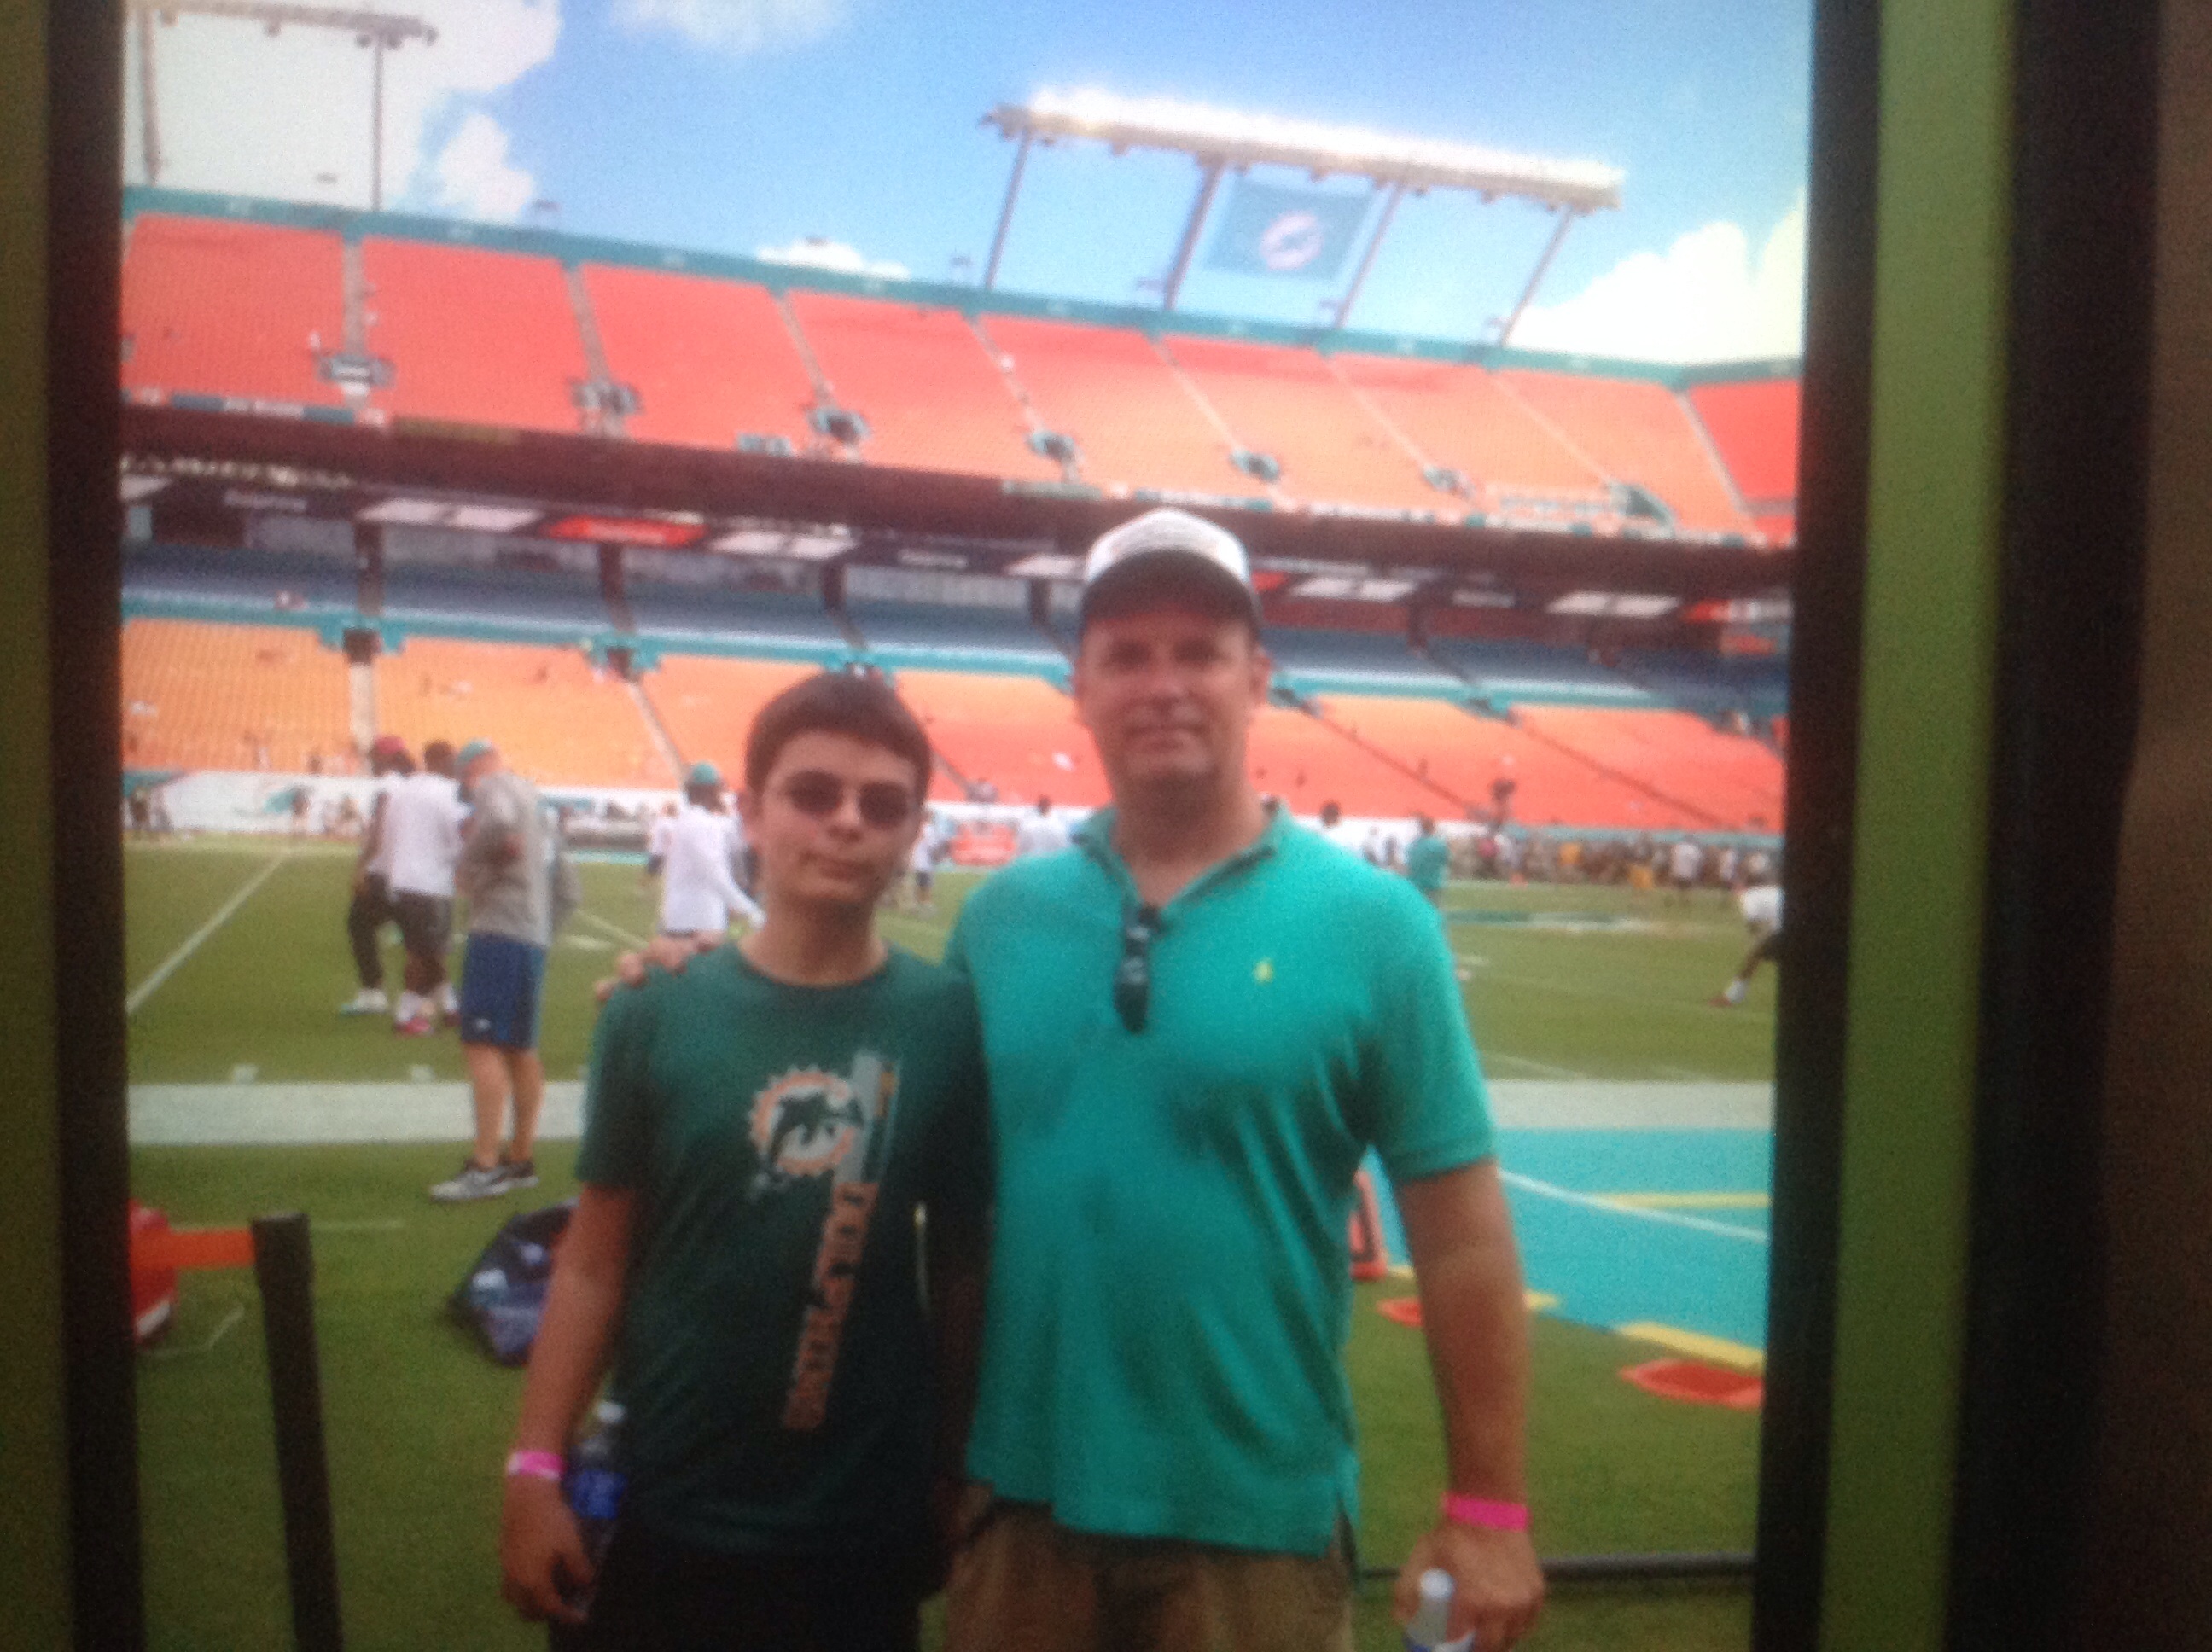 John and I did a short interview with great Larry Csonka at breakfast , now were off to the field for more commentary/